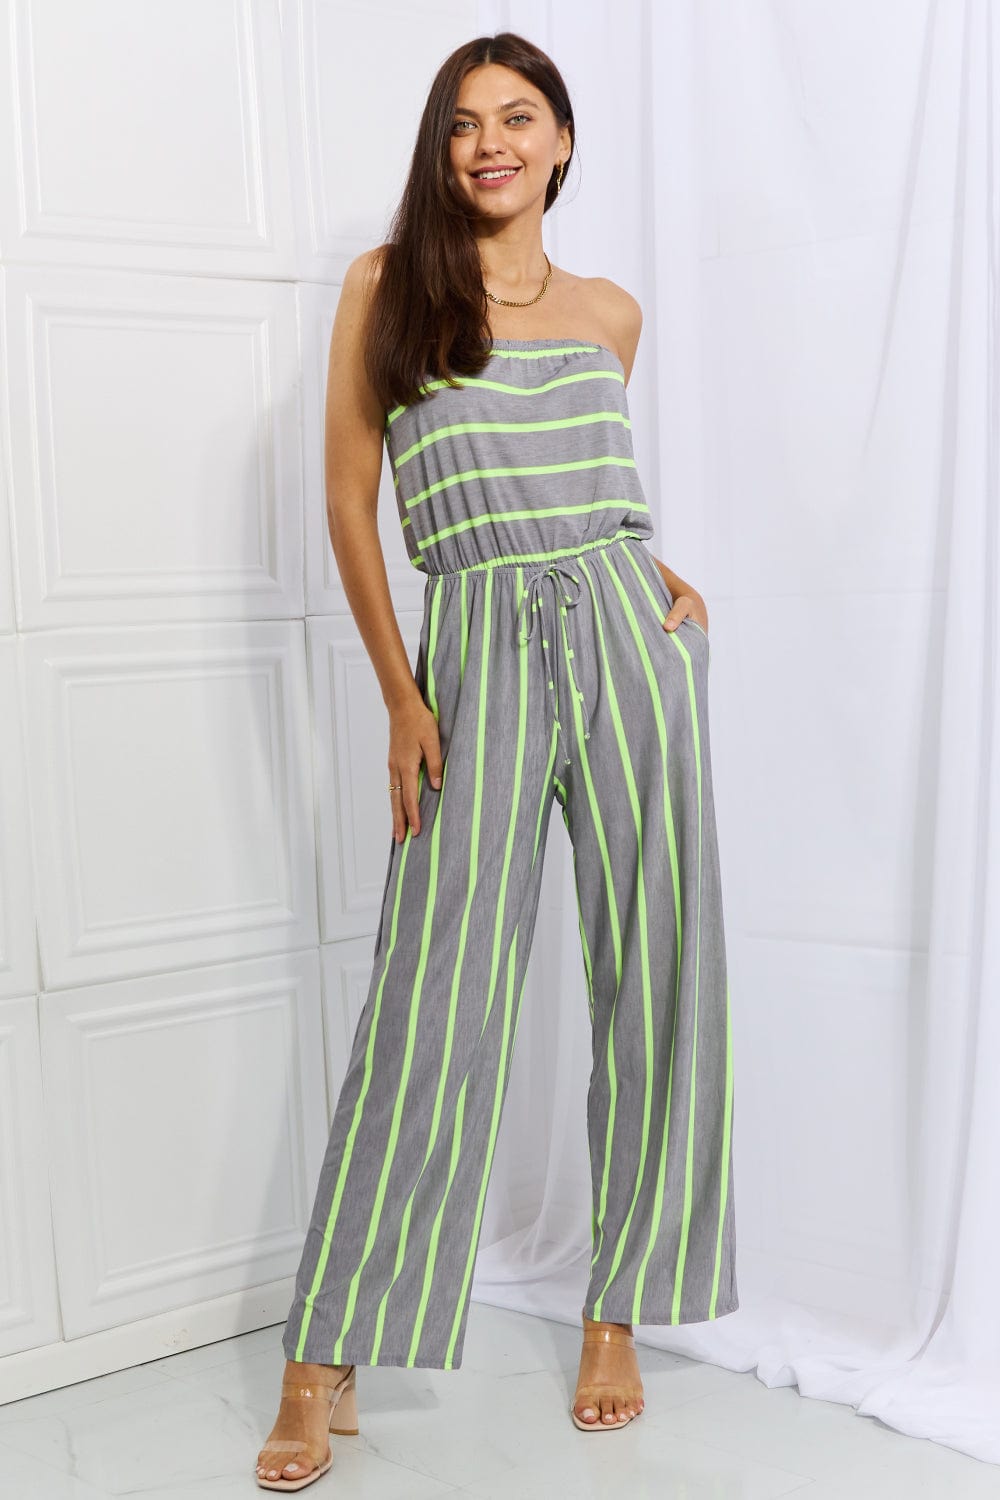 Sew In Love Pop Of Color Full Size Sleeveless Striped Jumpsuit - Runway Frenzy 